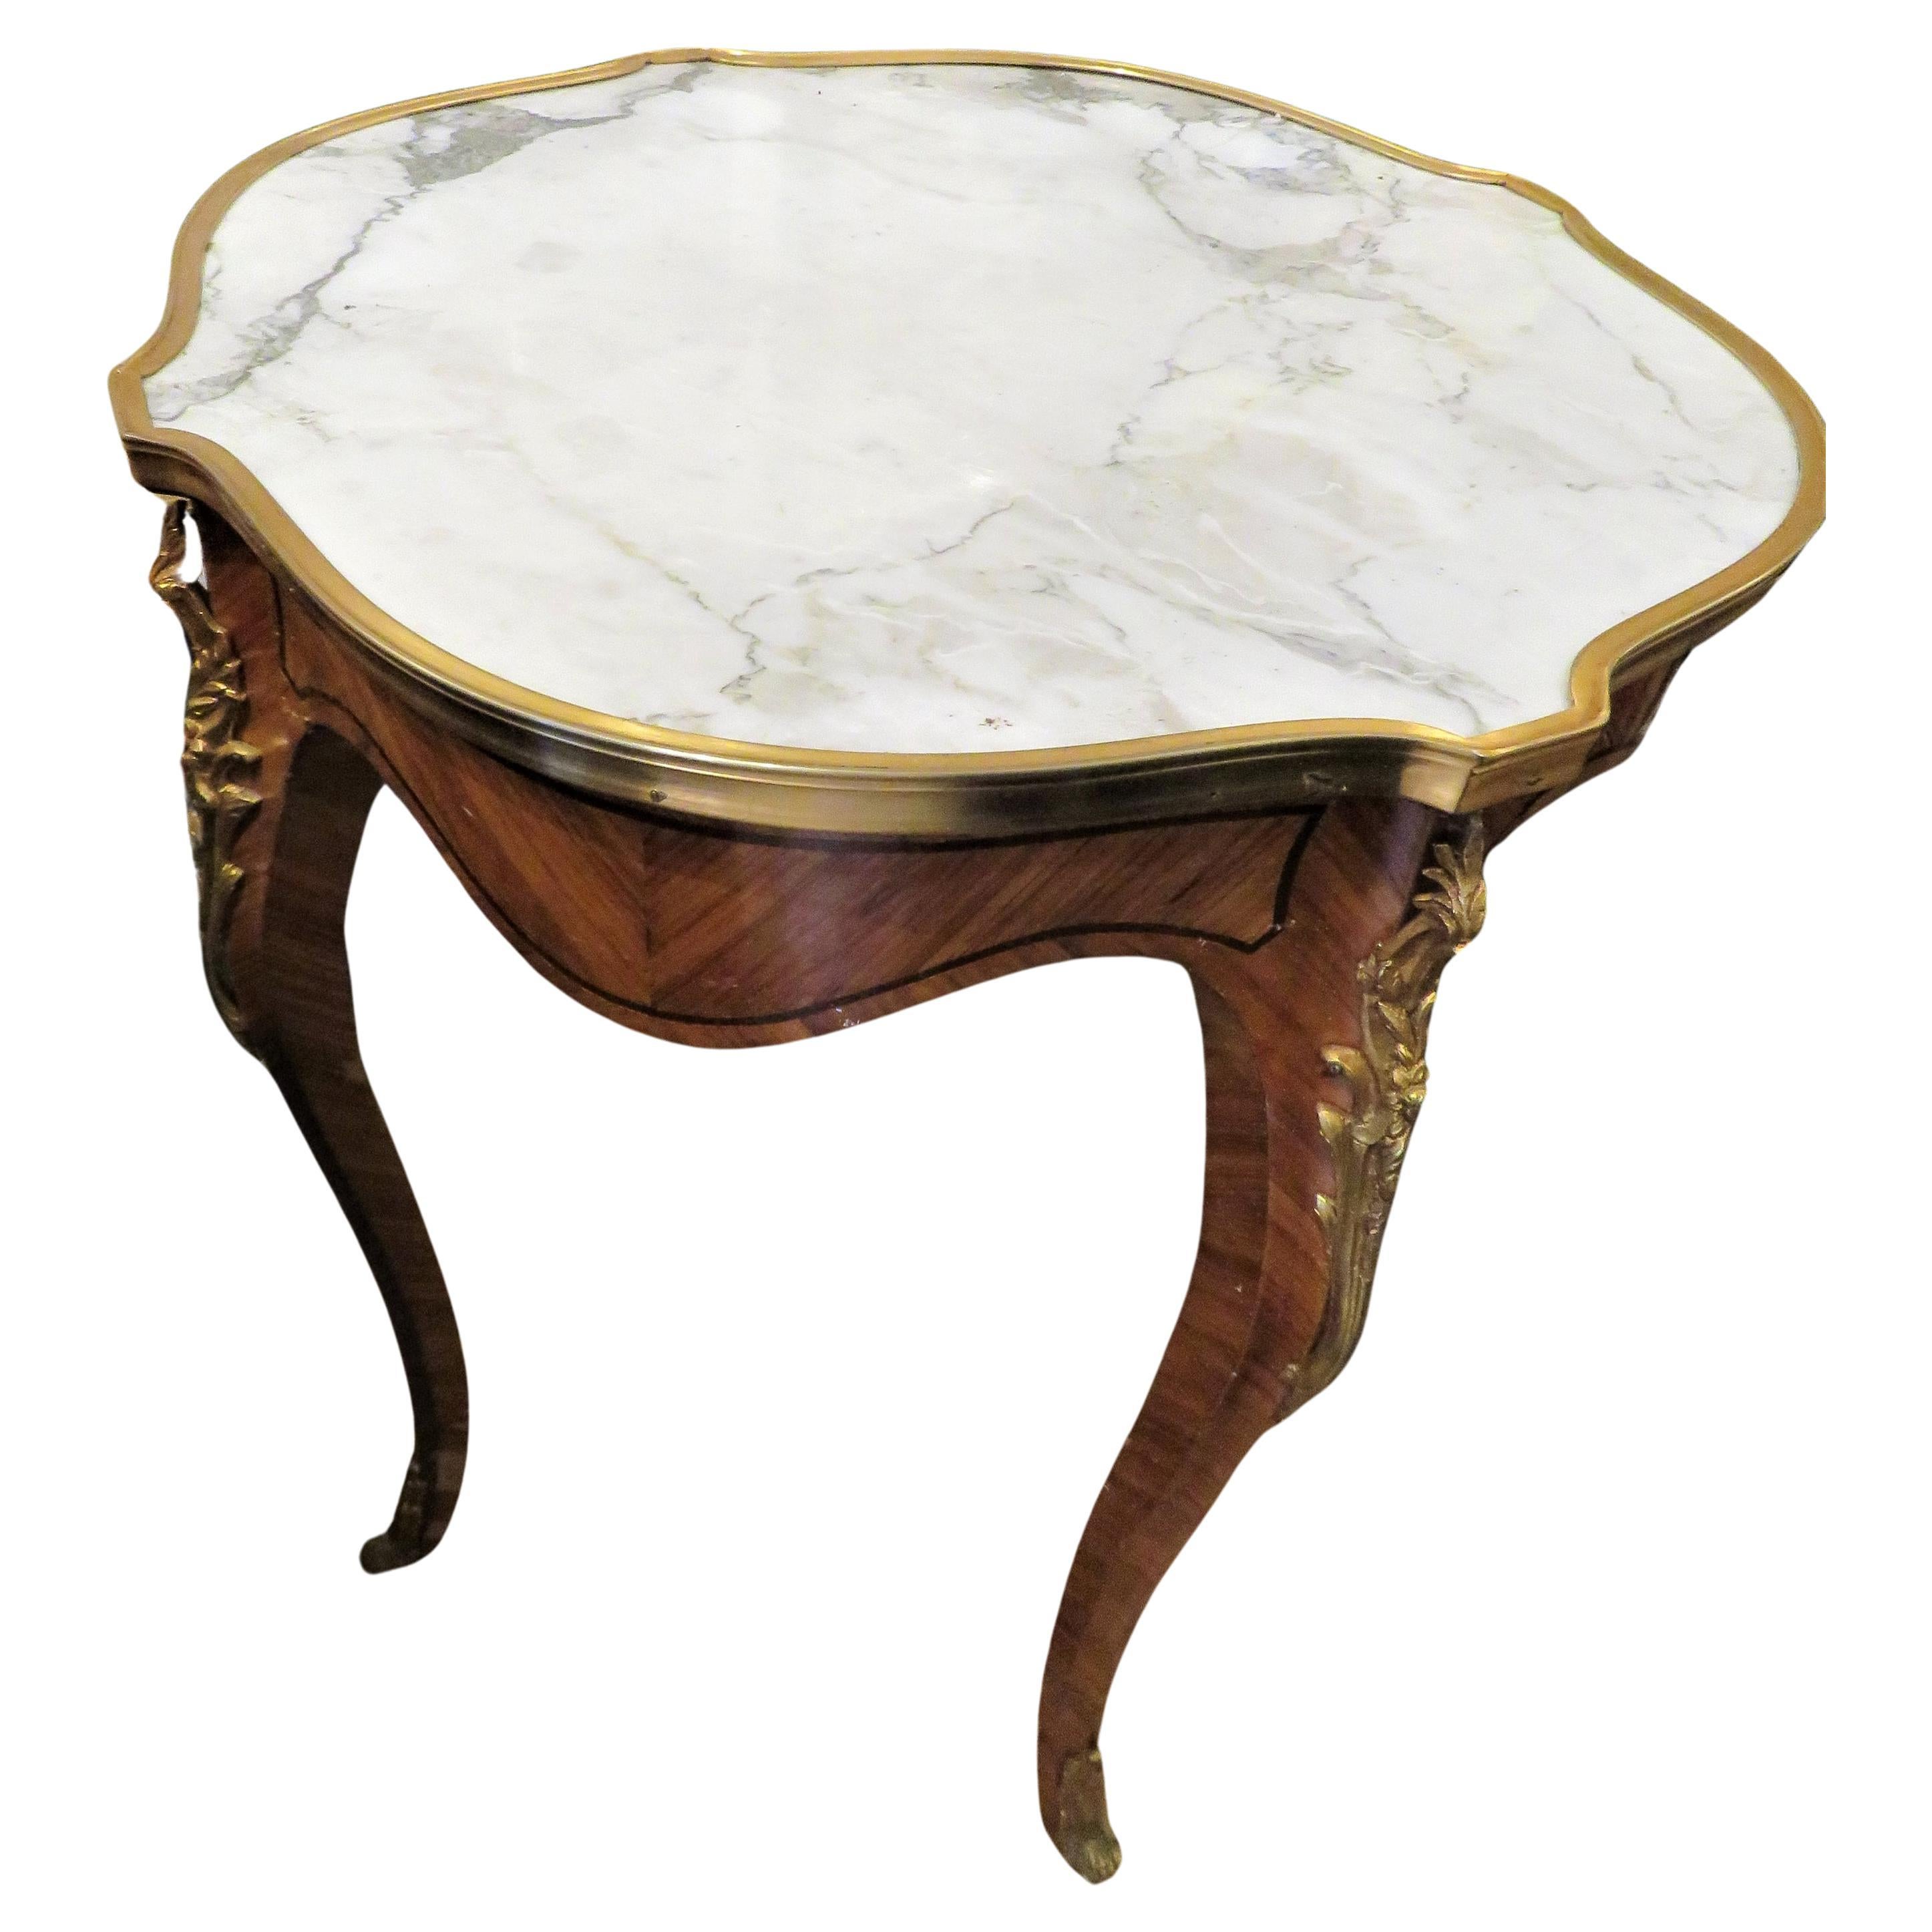  Important French Rare 19TH Century Gilt Bronze Mahagony White Marble Table For Sale